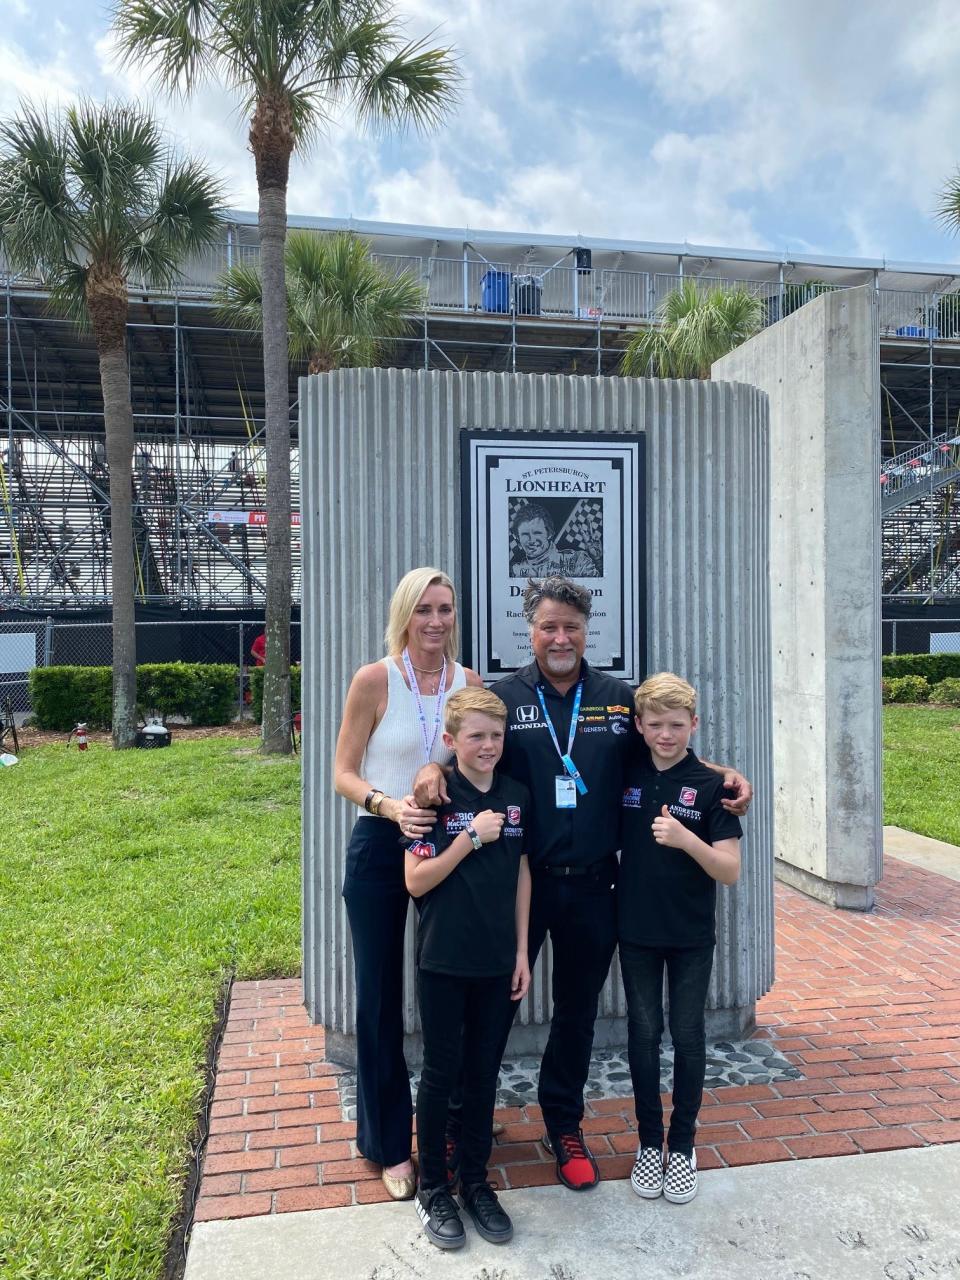 Susie Wheldon and her sons Sebastian and Oliver pose with Michael Andretti at the Dan Wheldon Memorial as the boys were announced as developmental drivers for Andretti's race team.